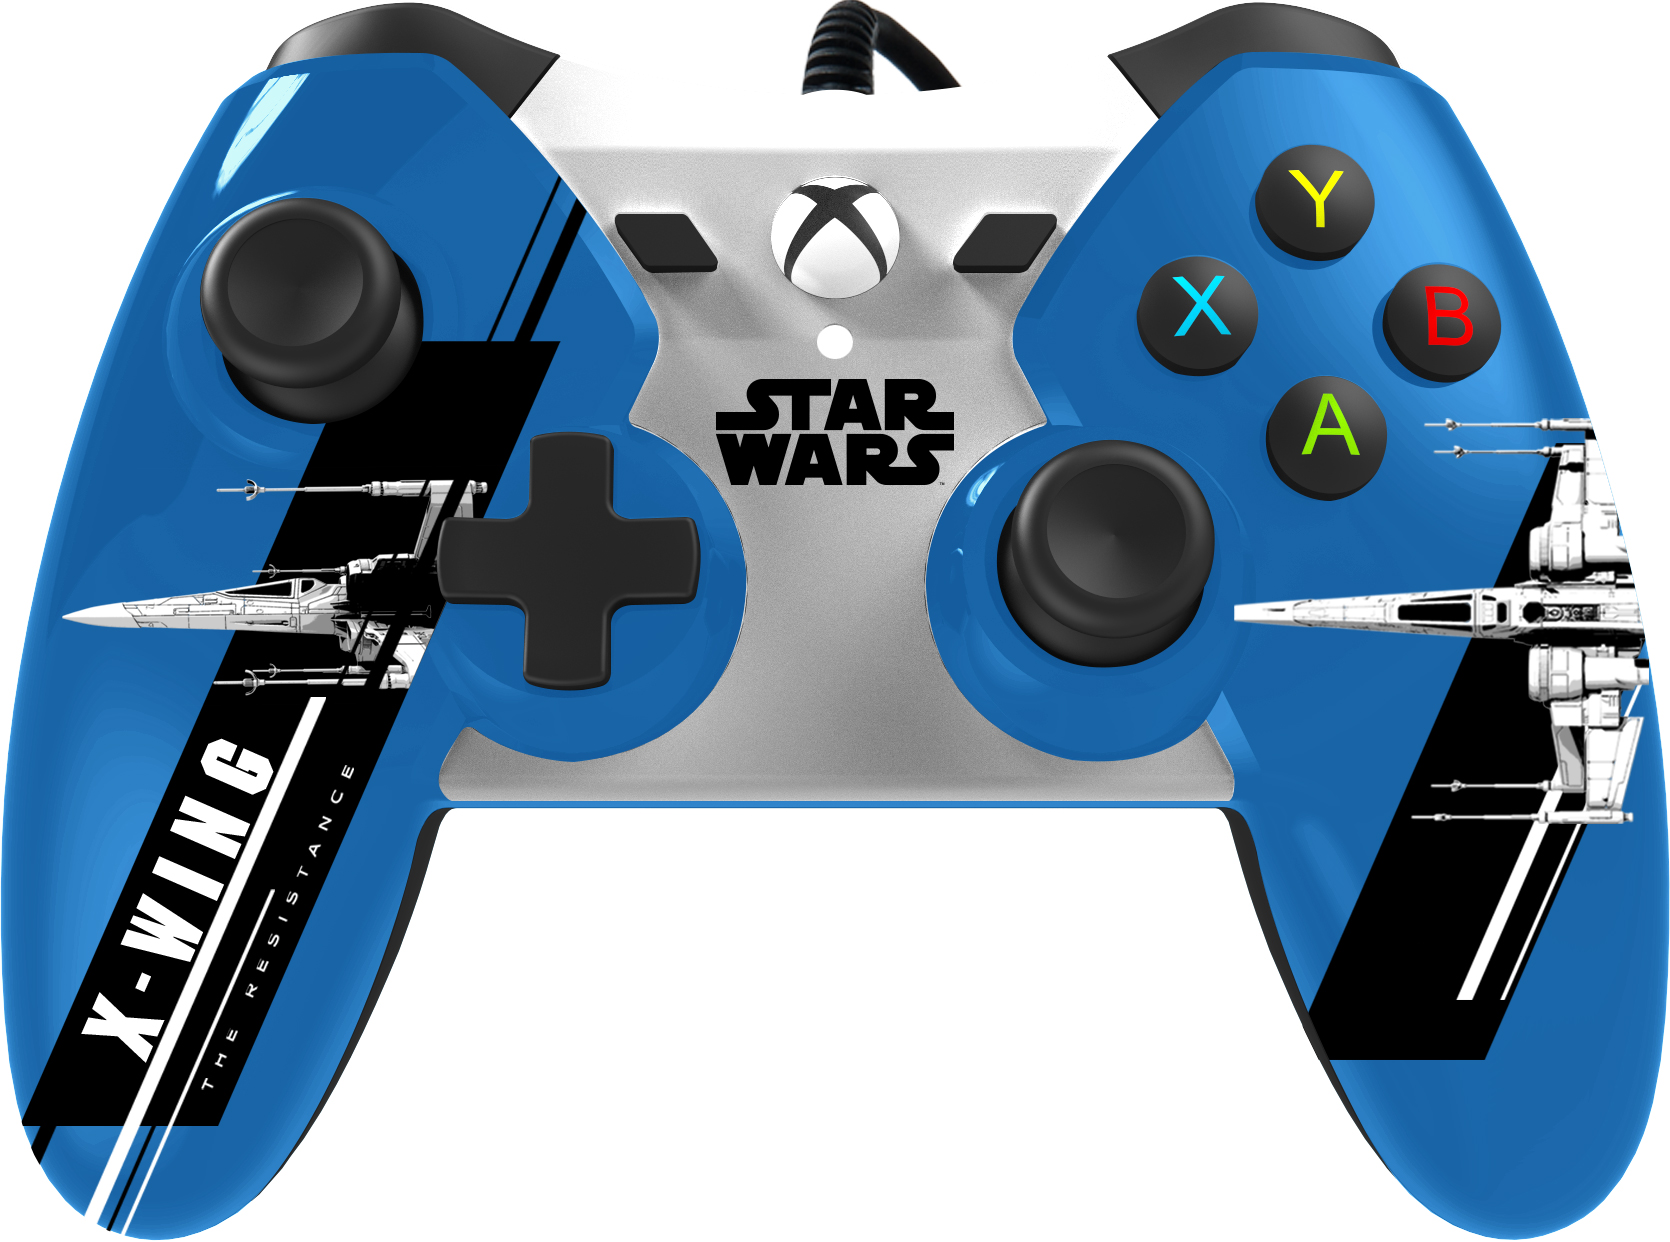 X-Wing  'Star Wars: The Force Awakens' PowerA Xbox One Controller